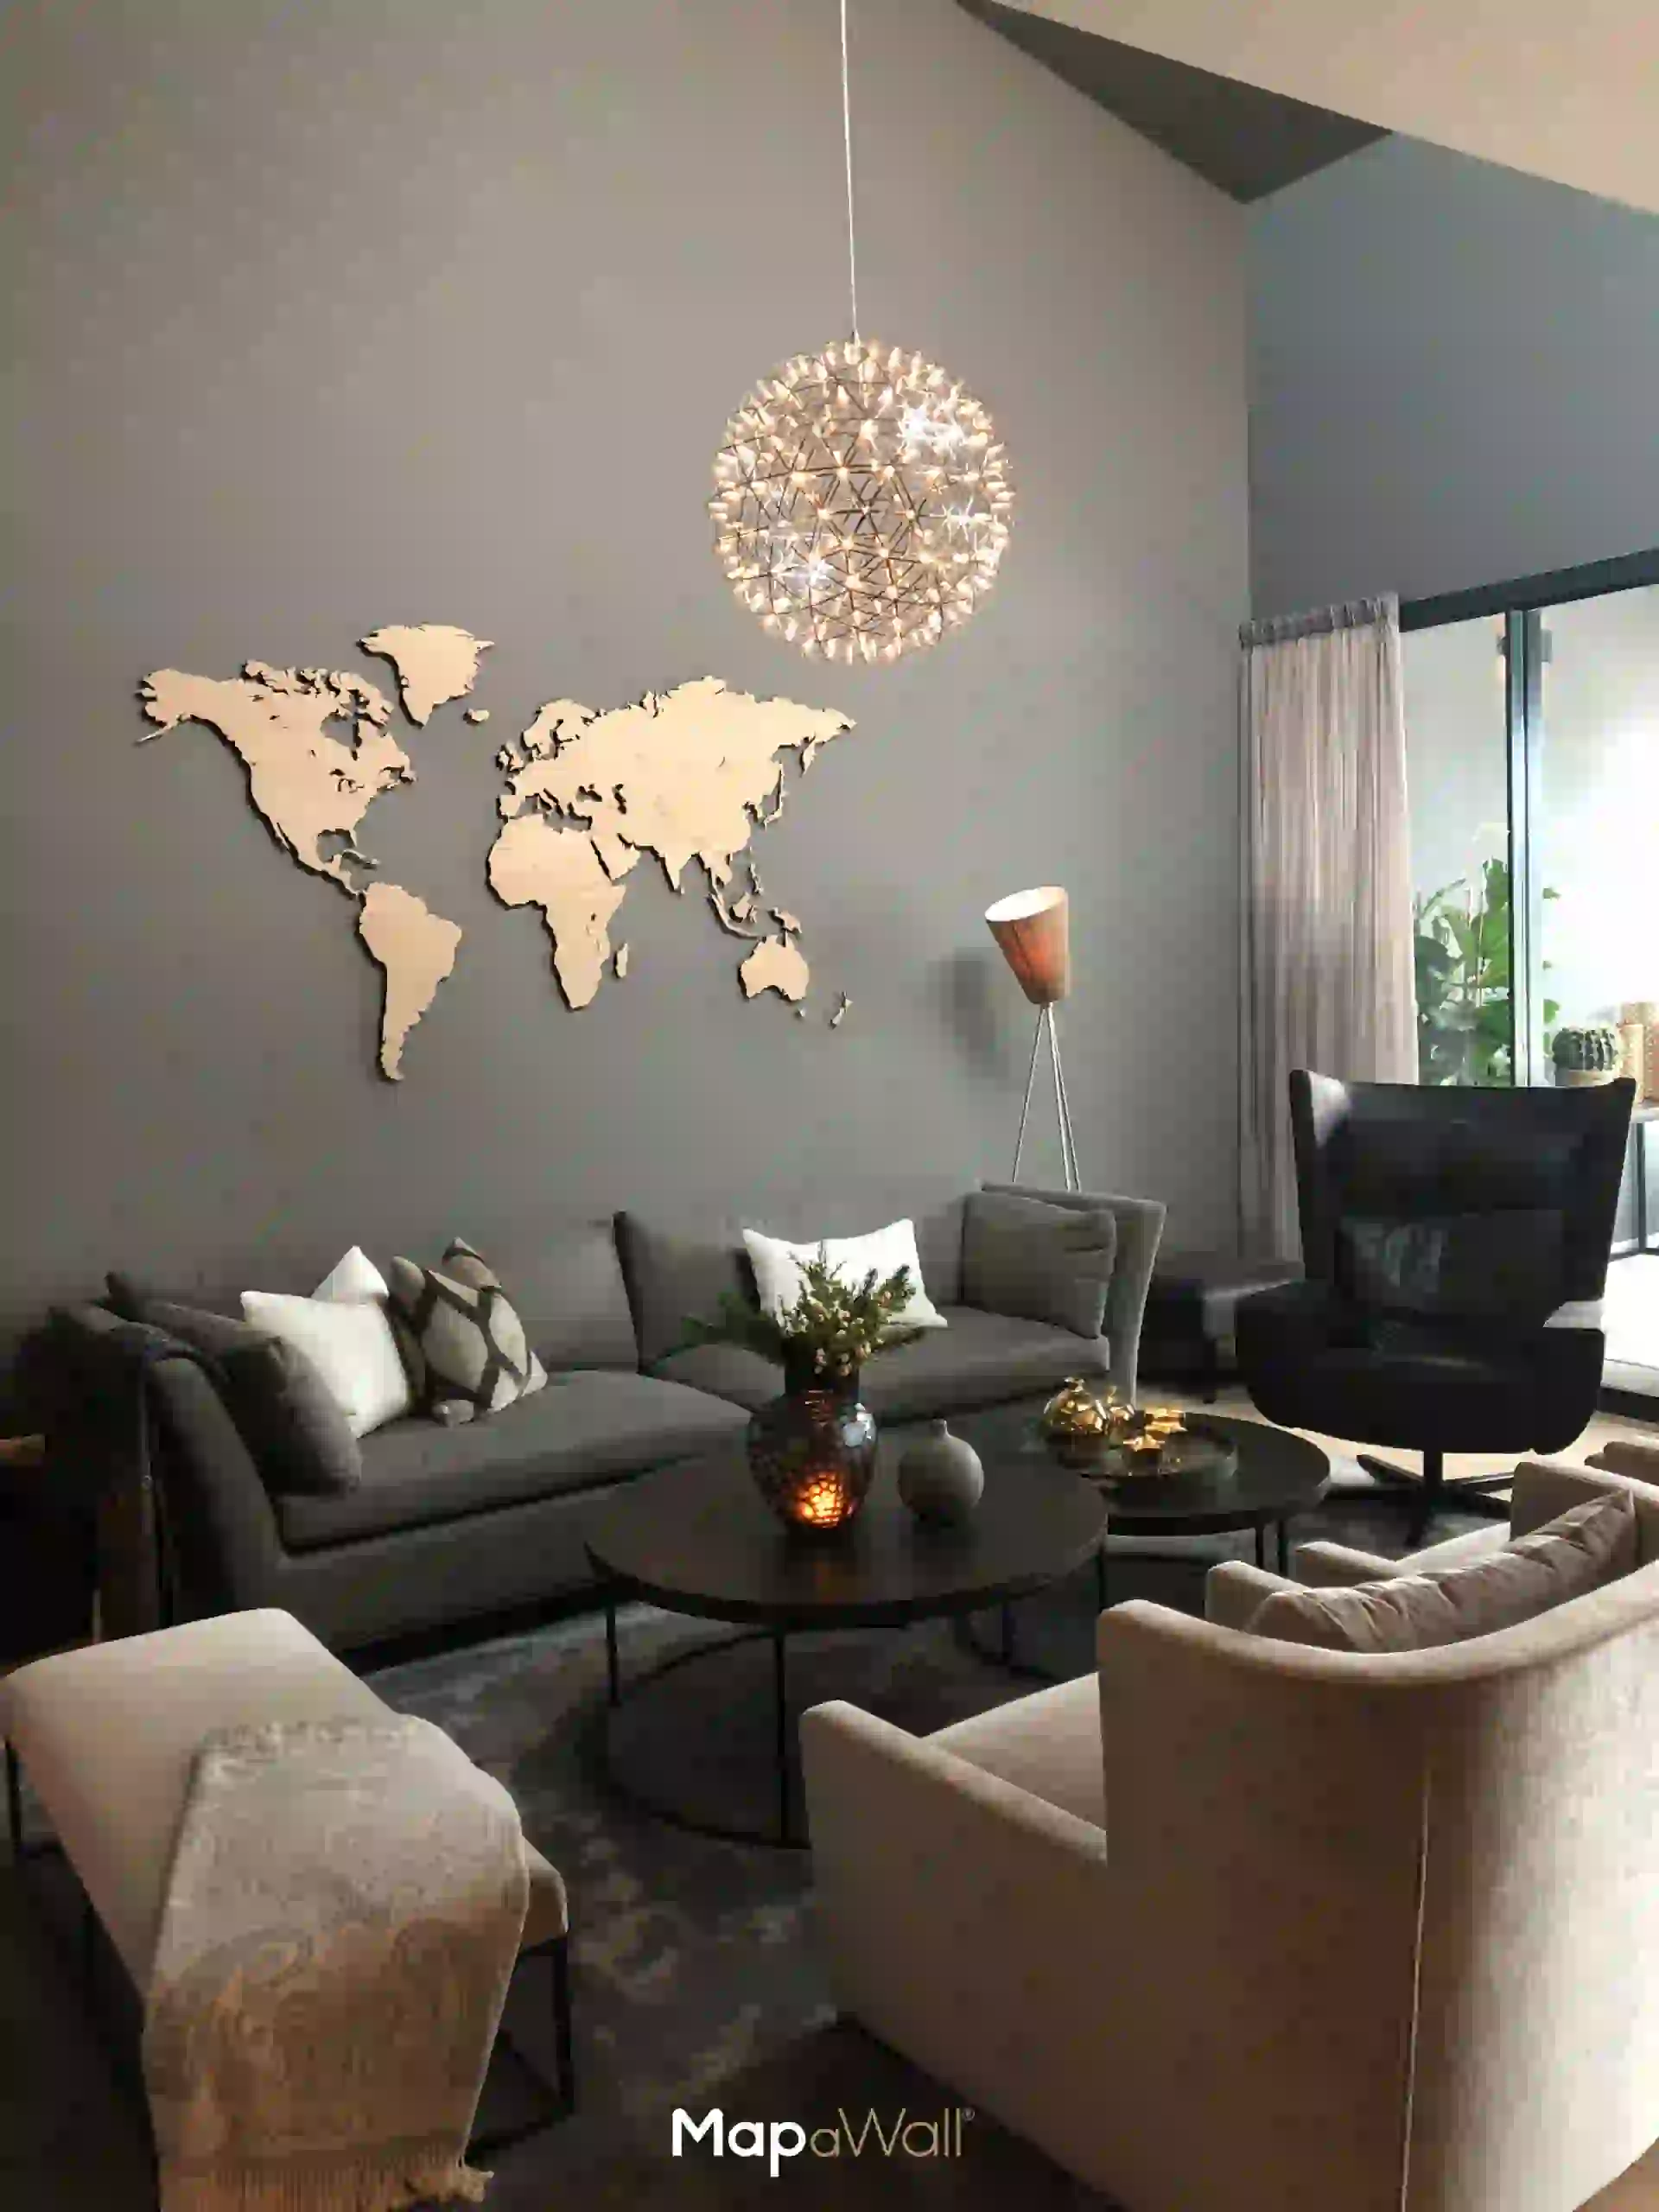 A magnetic MapaWall European Oak world map untreated with country borders, installed in a modern Scandinavian interior